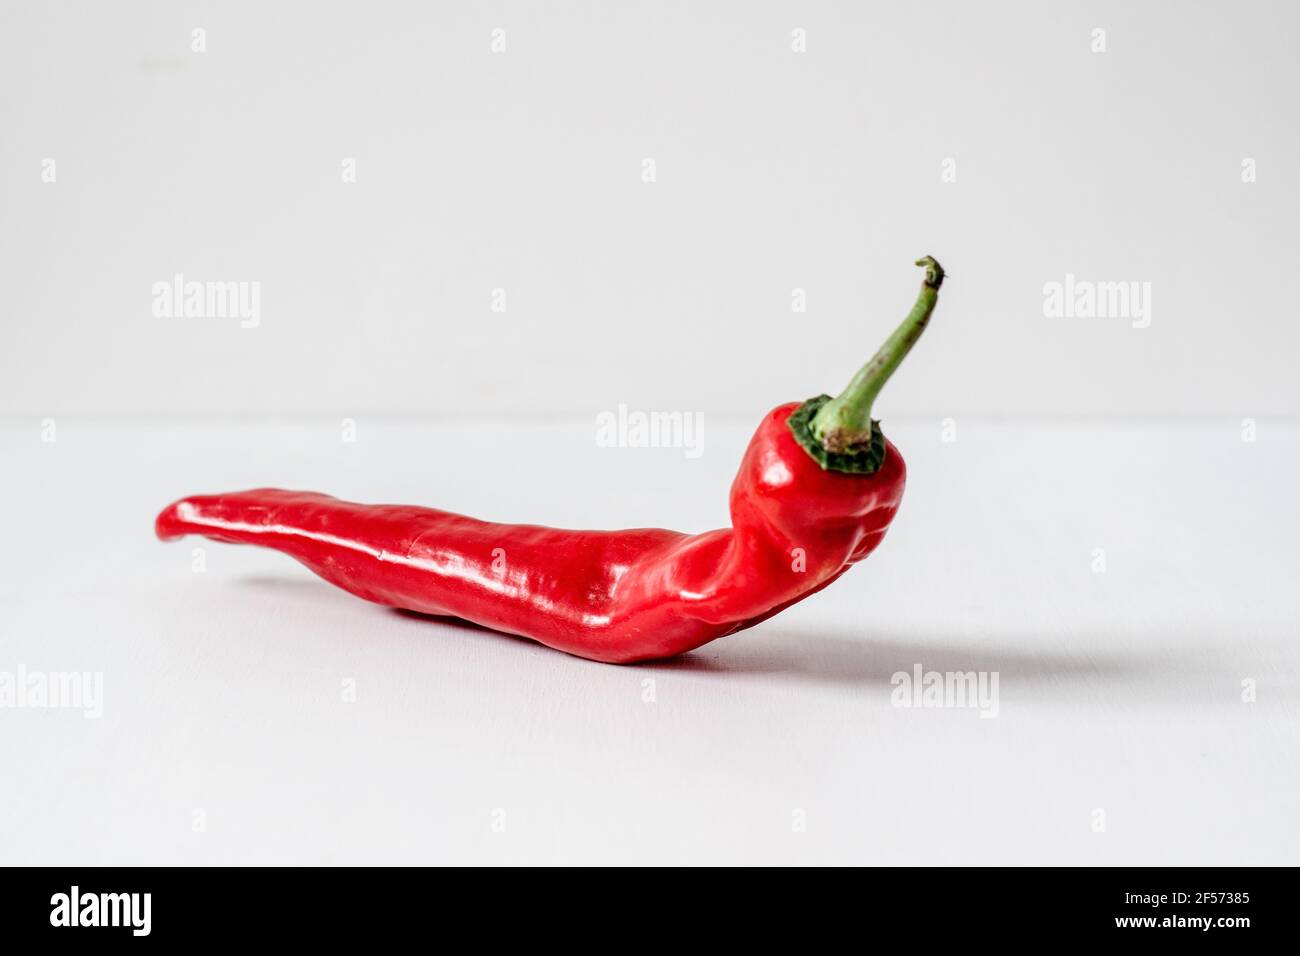 An Organic Red Romano Pepper against a plain background Stock Photo